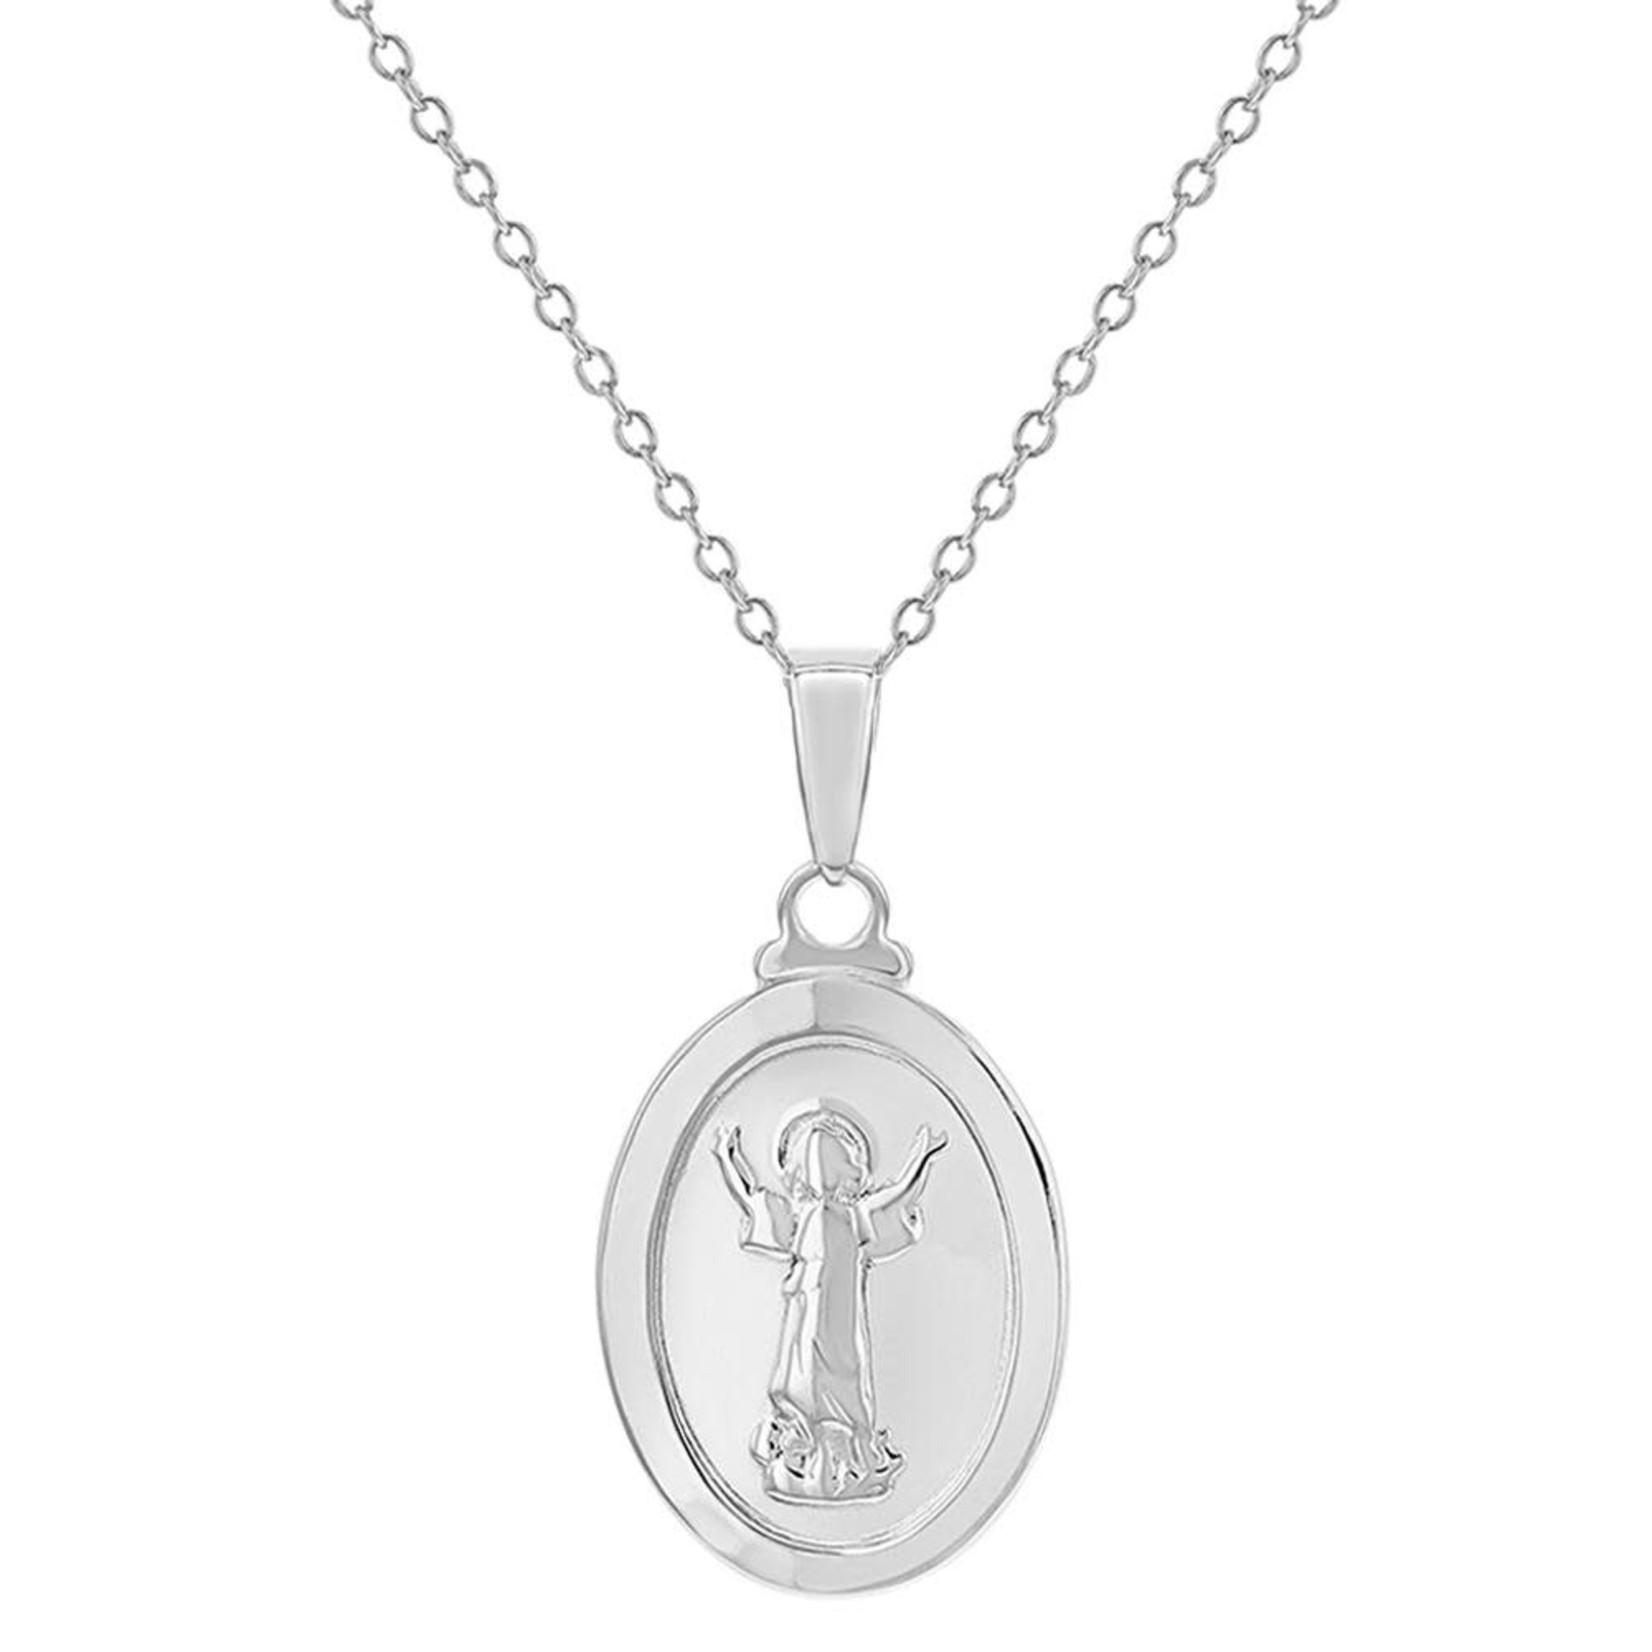 Gold Plated Child's St. Christopher Necklace